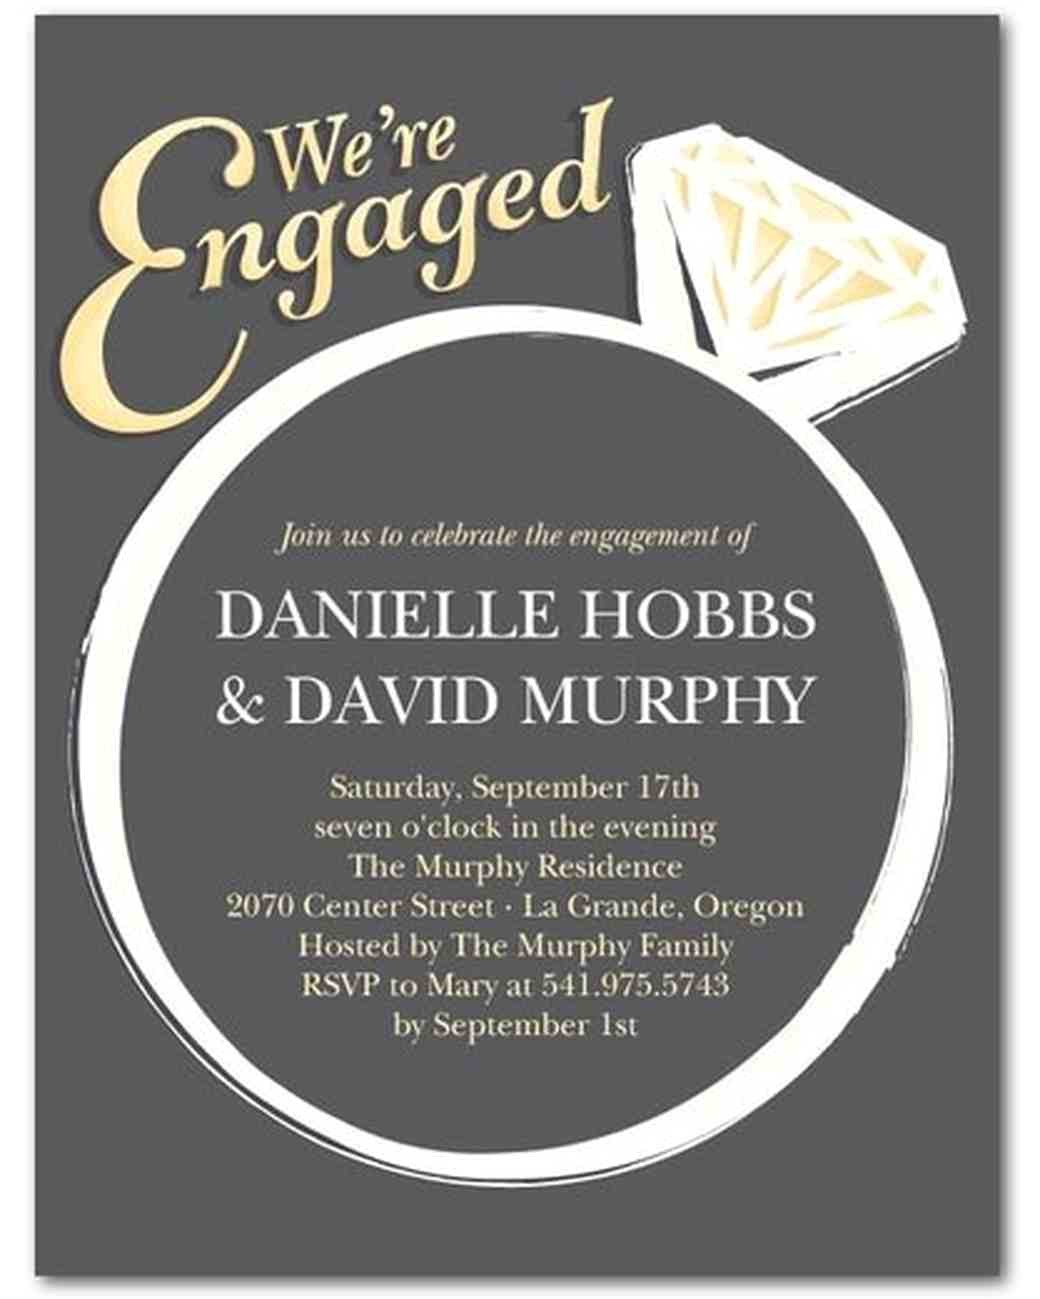 Evite Engagement Party Invitations 15 Engagement Party Invitations Martha Stewart Weddings